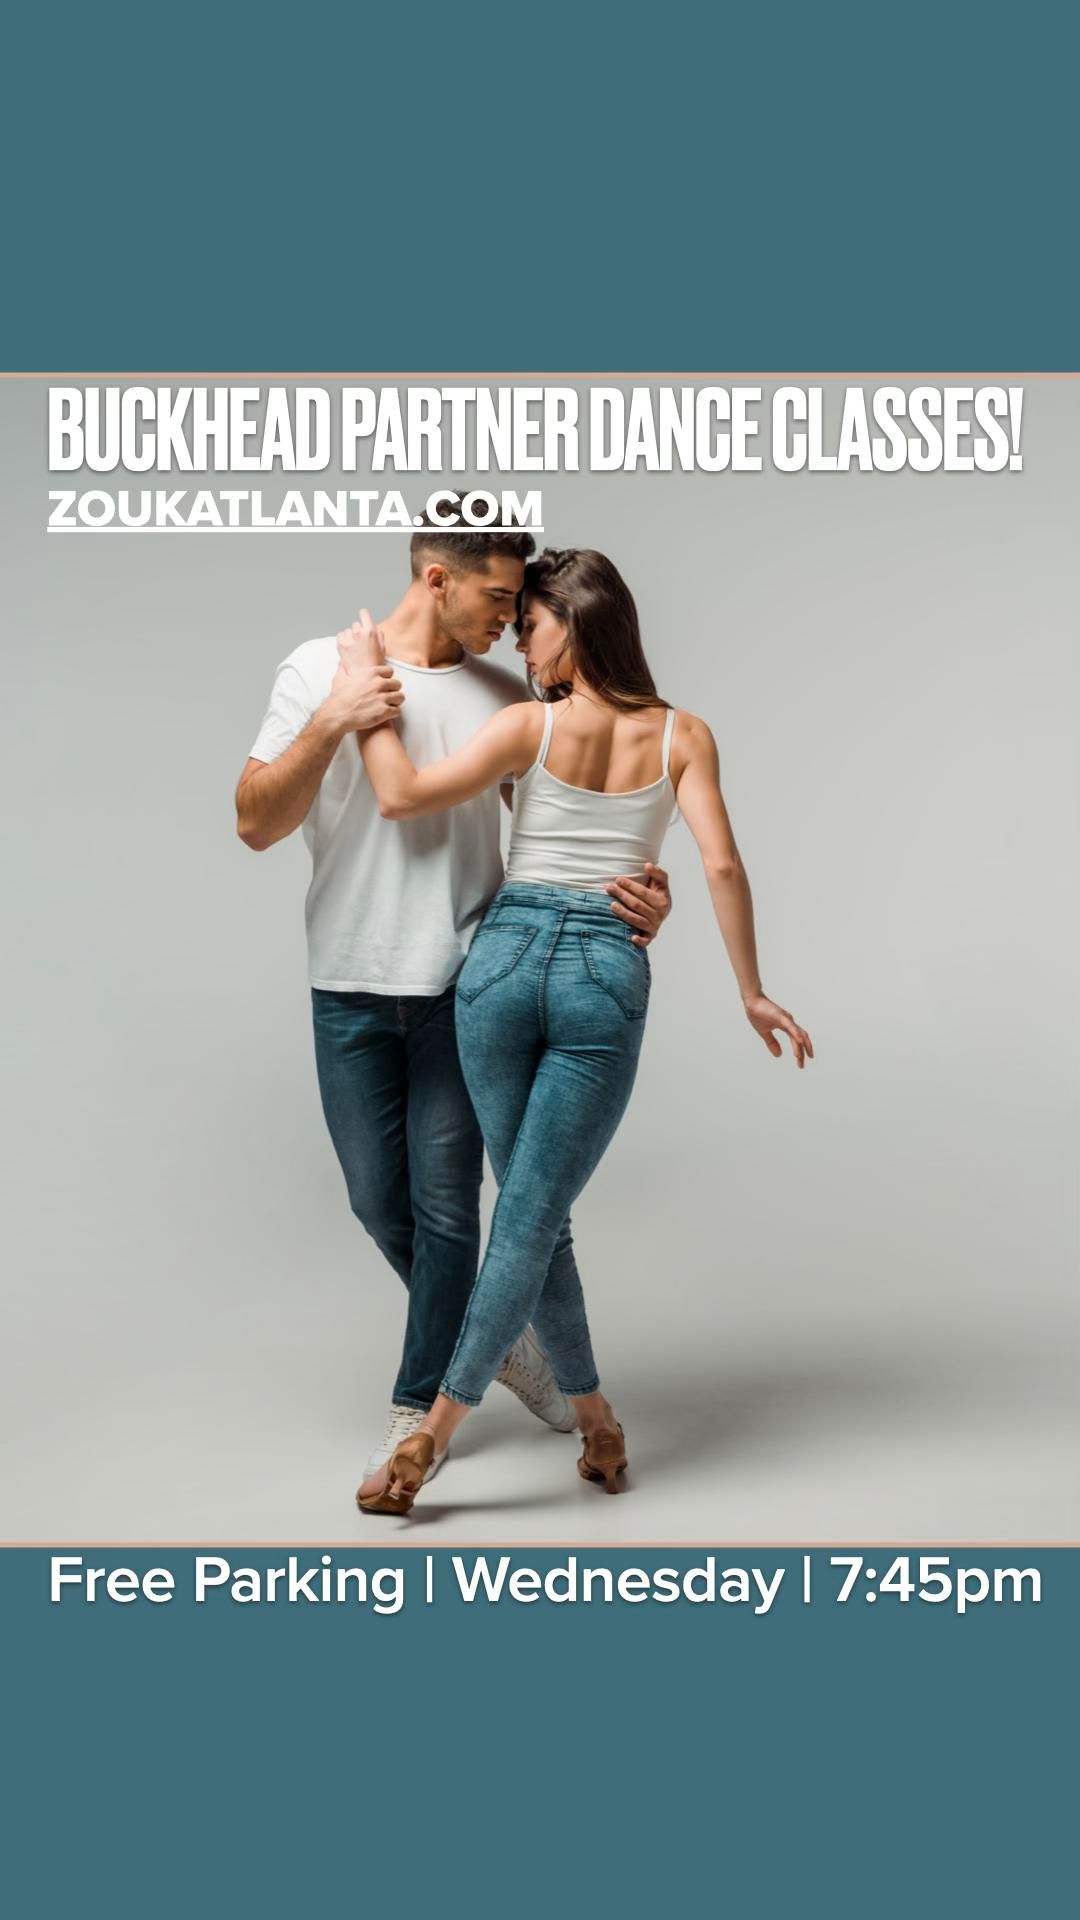 Learn to Dance | Beginner to Advanced Wednesday Weekly Classes & Party in Buckhead | Zouk Atlanta